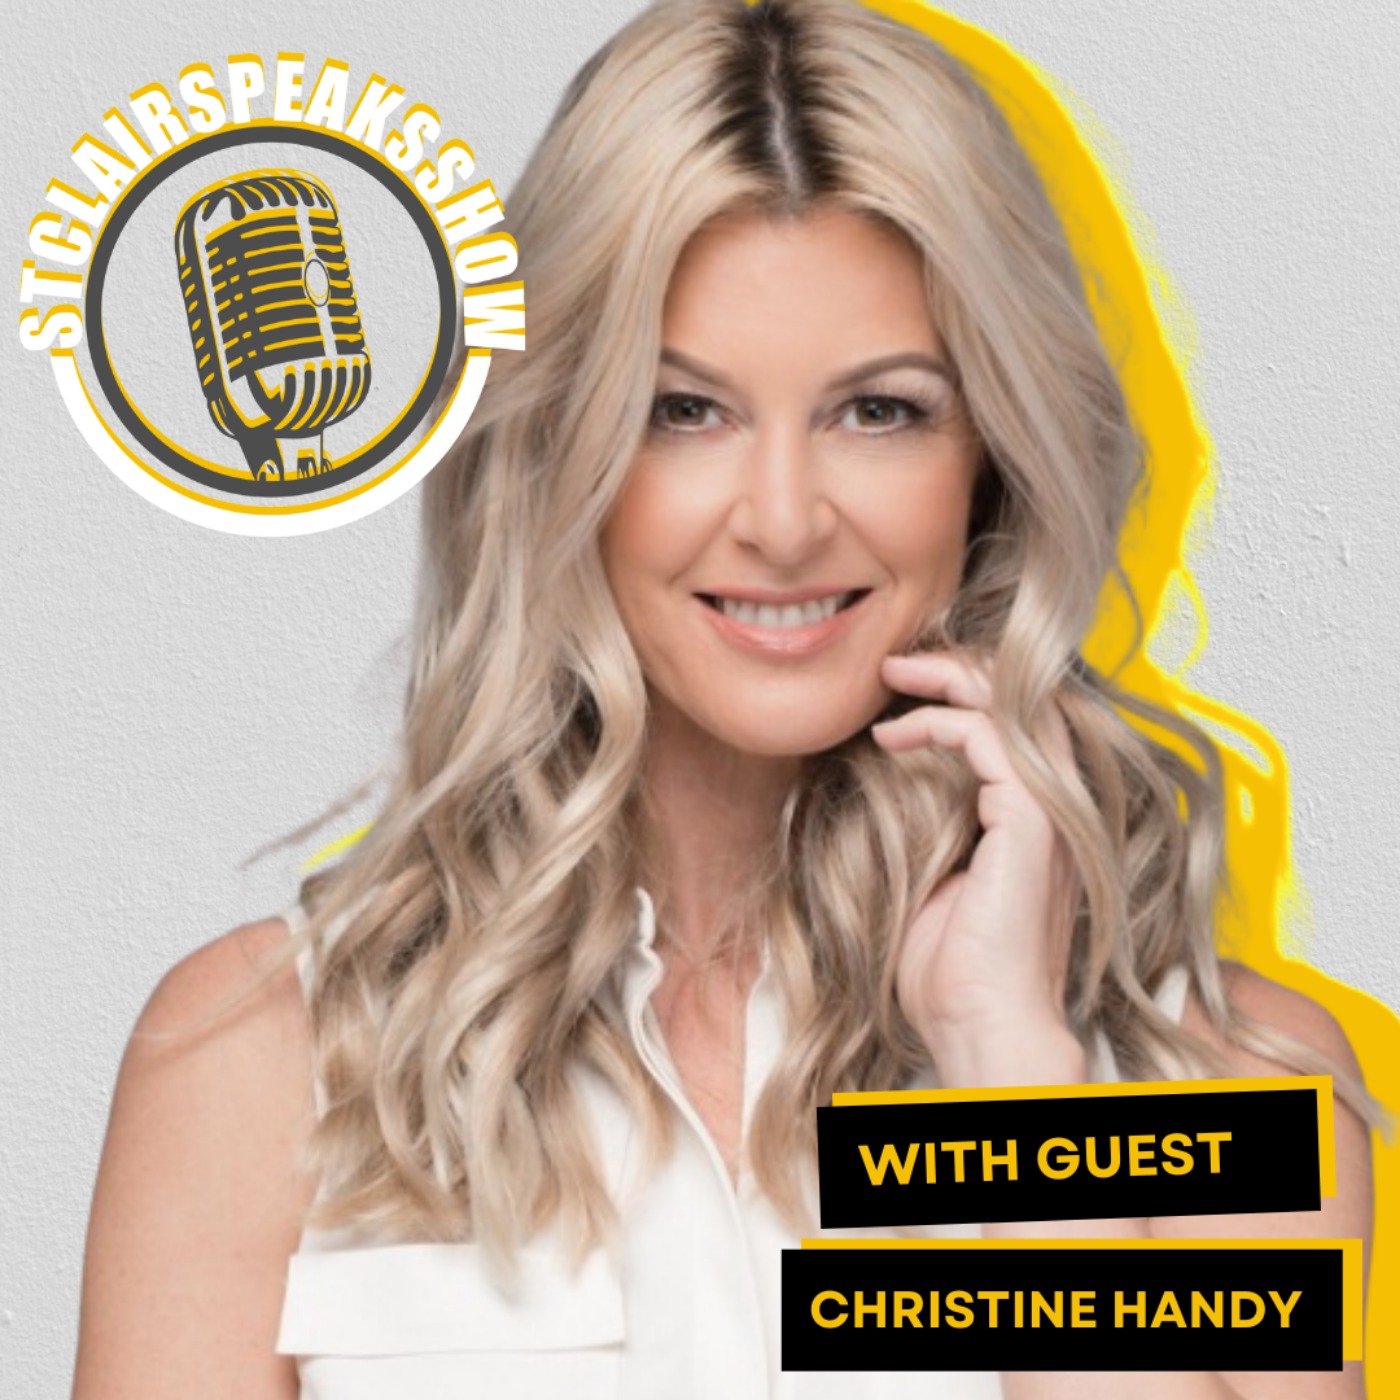 The StclairSpeaksShow Podcast with Christine Handy - Finding Your Purpose, Community & Support System.